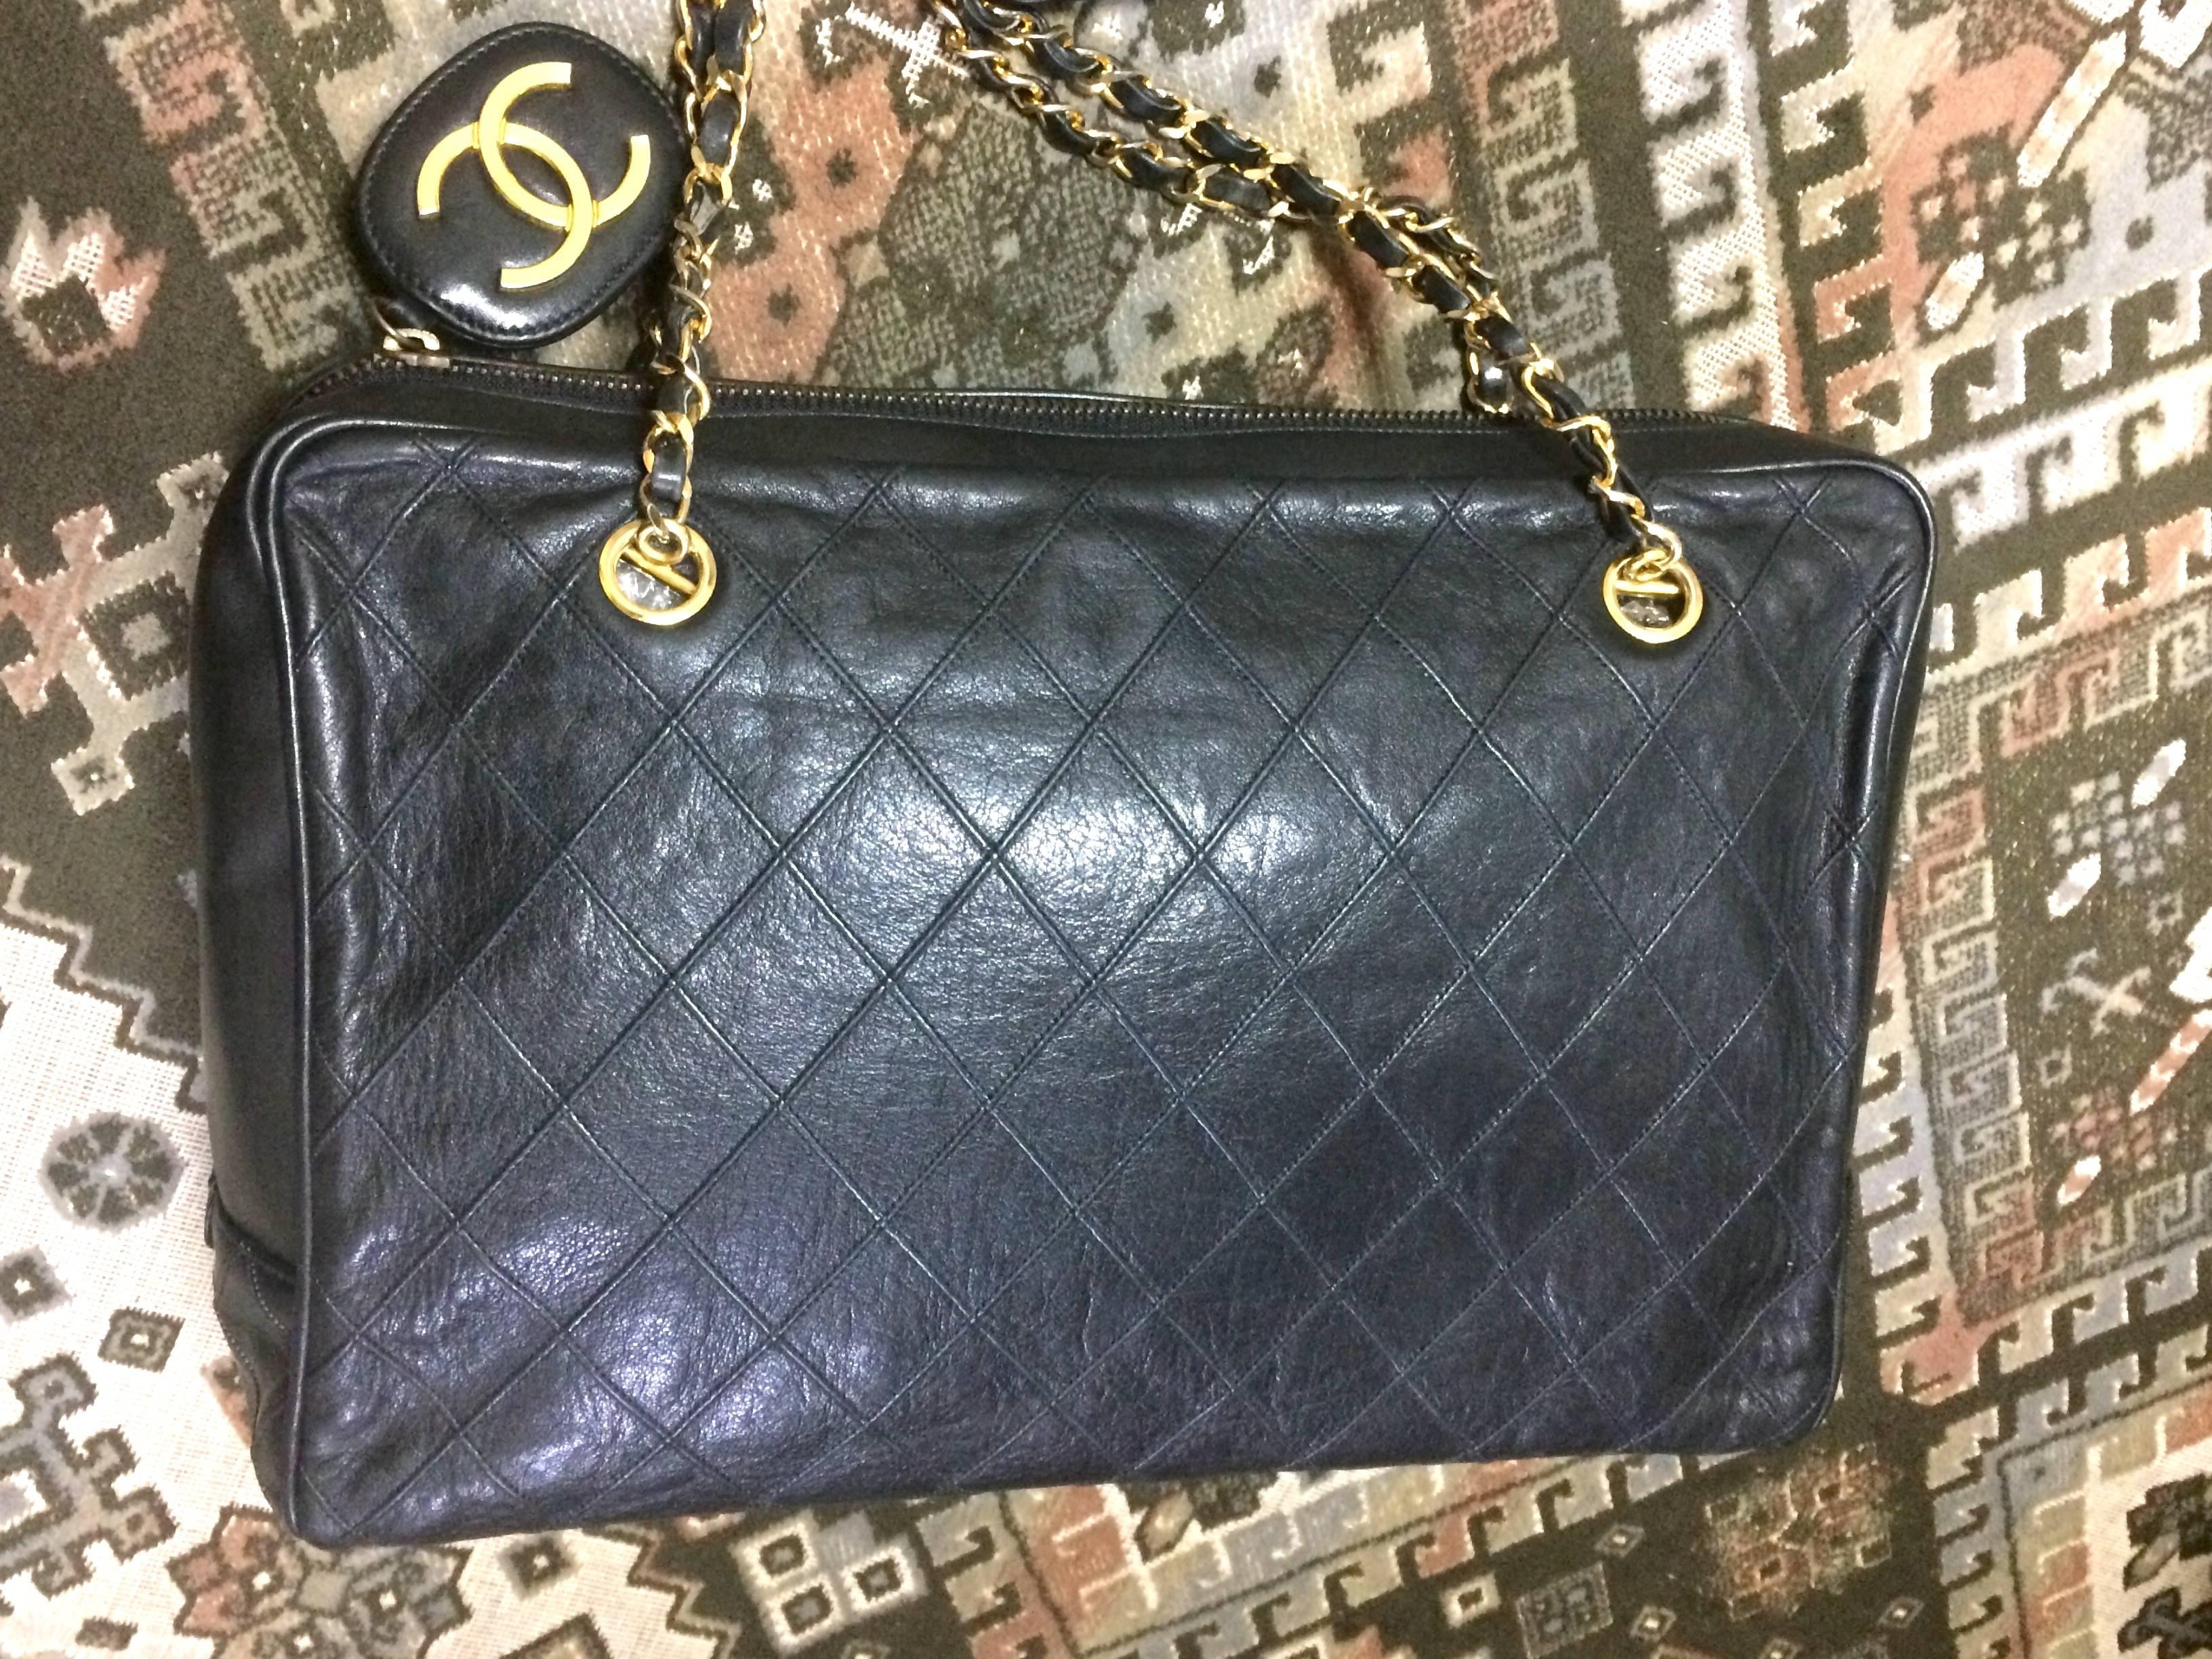 1980s. Vintage CHANEL black goatskin classic large shoulder bag with gold tone chain straps and a large oval square golden CC mark charm.

Introducing a vintage CHANEL black goatskin with stitches shoulder bag with gold tone chain straps. 
One of